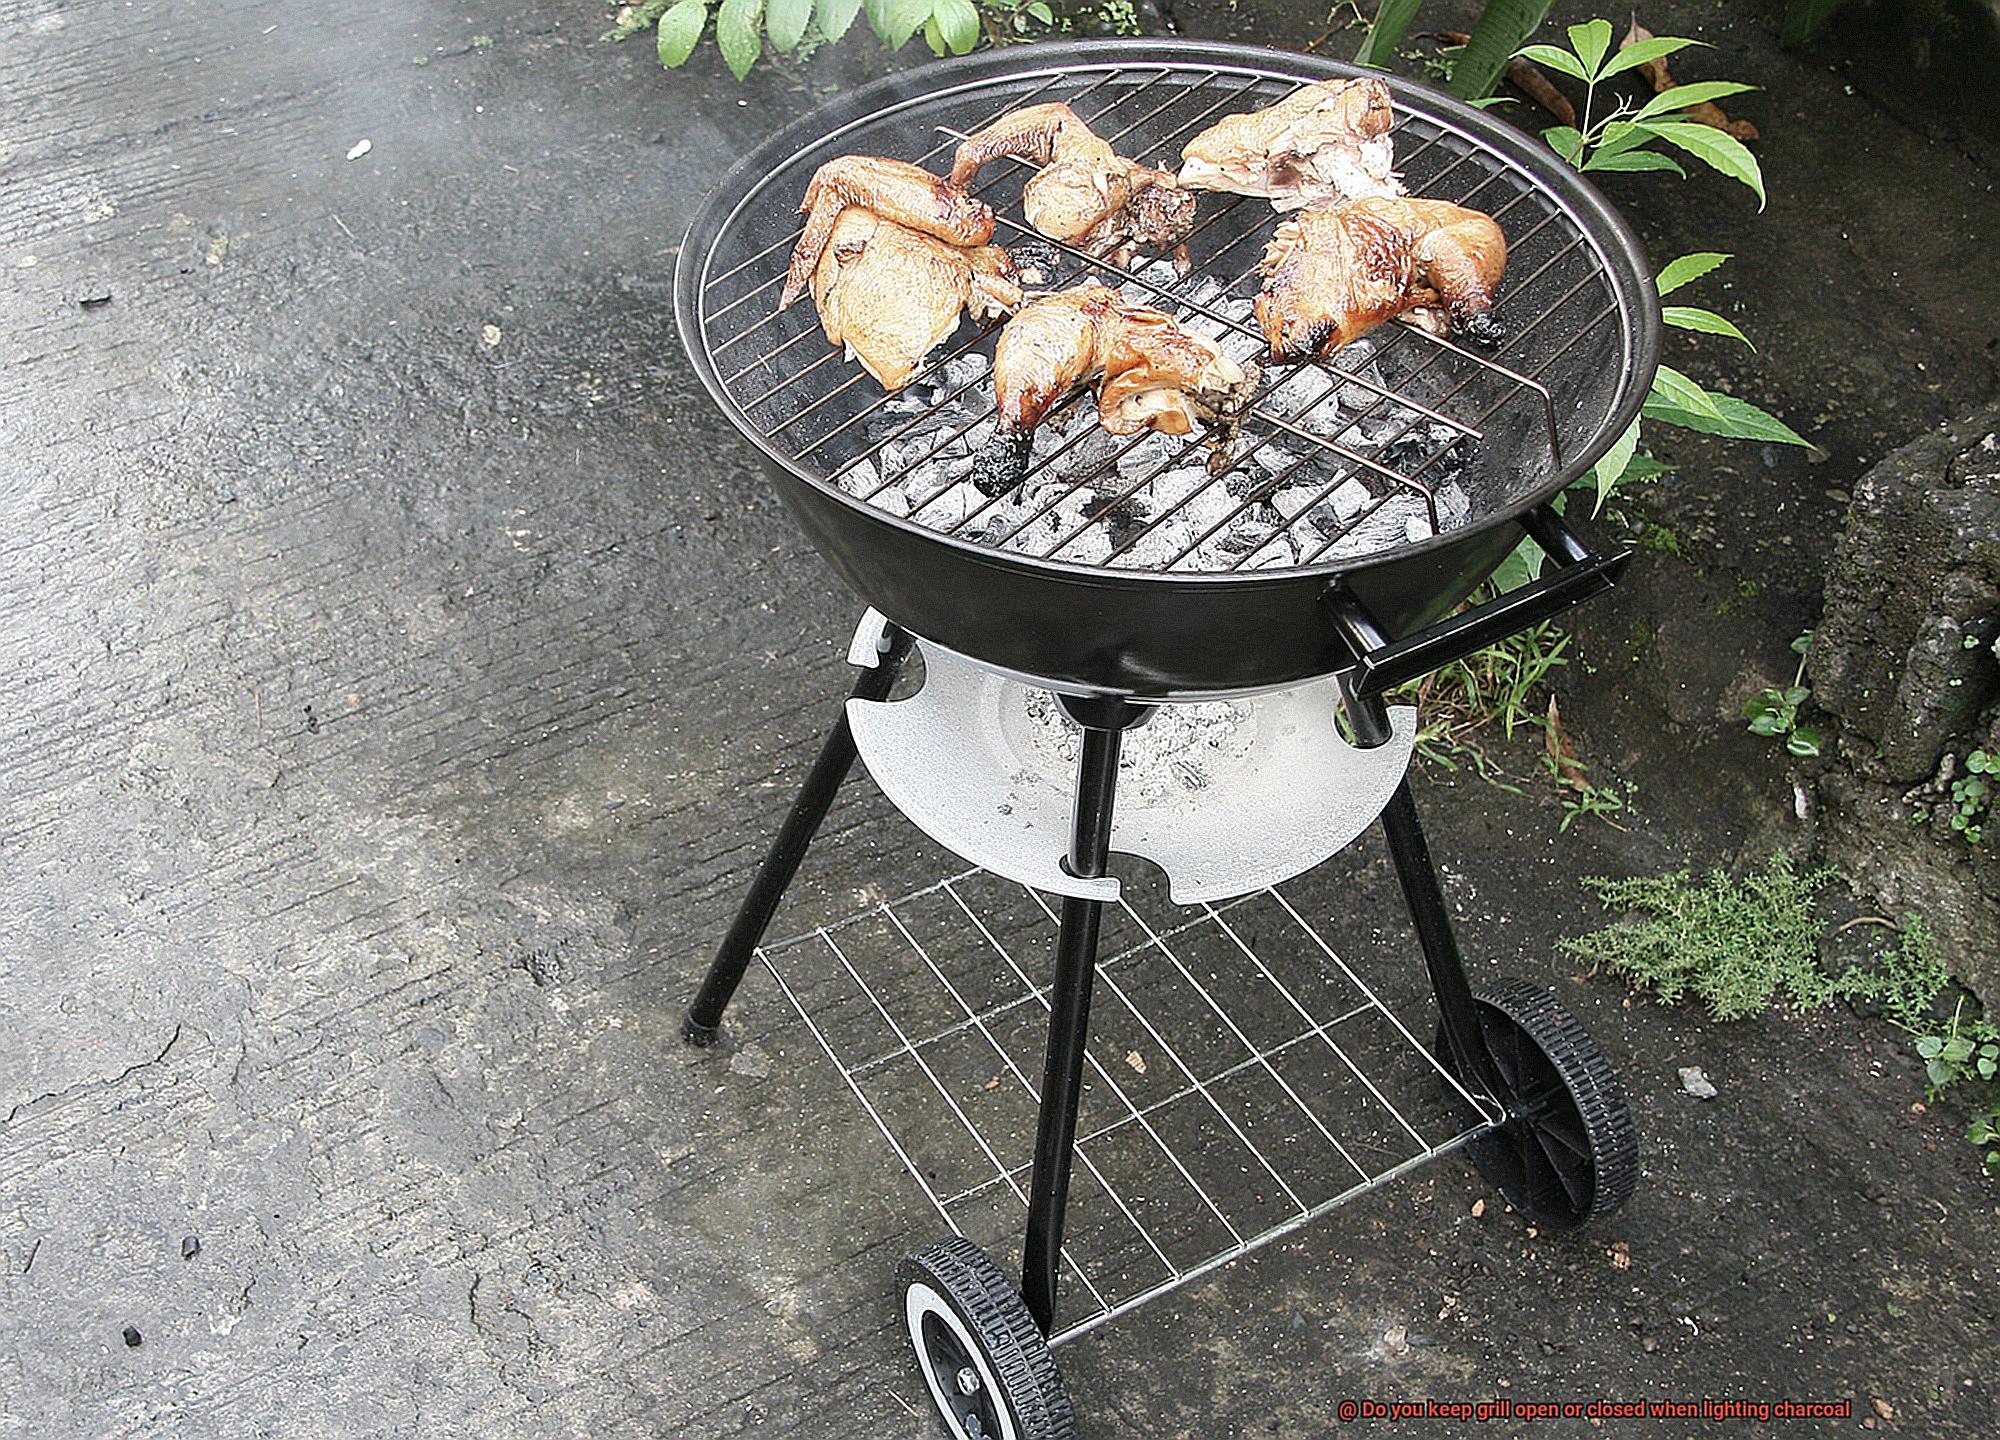 Do you keep grill open or closed when lighting charcoal-9